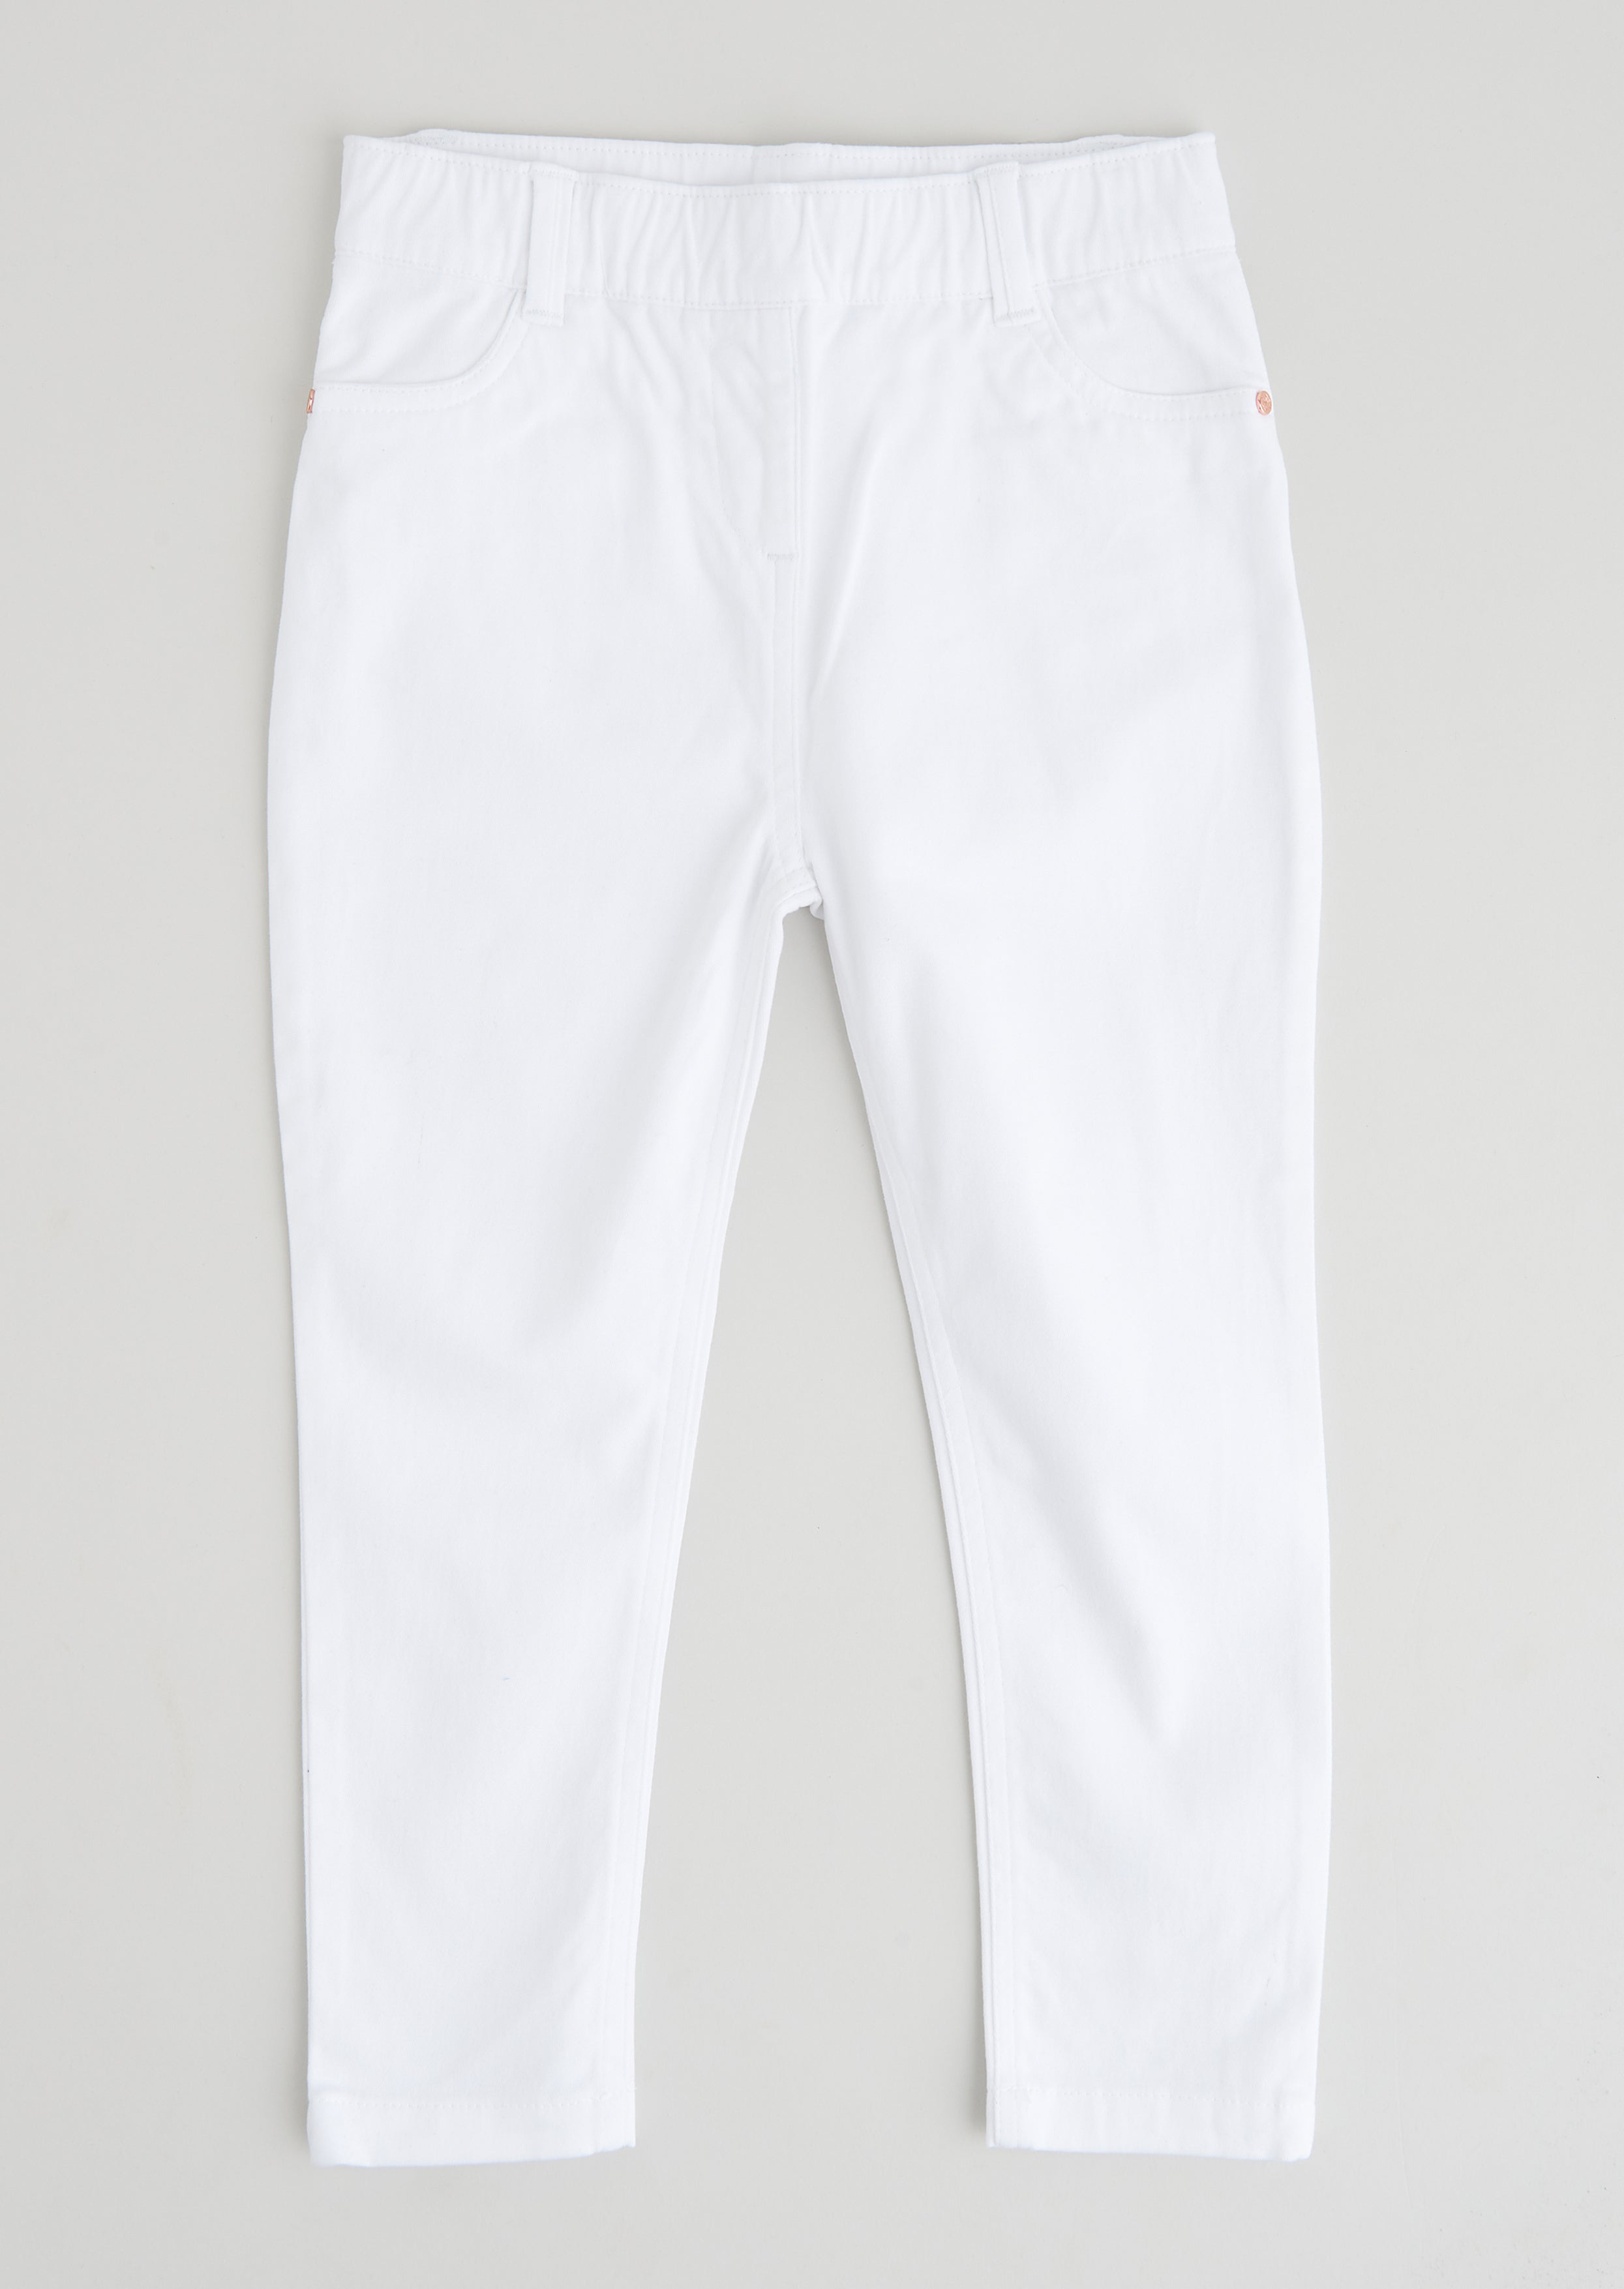 Girls Solid White Woven Jeggings